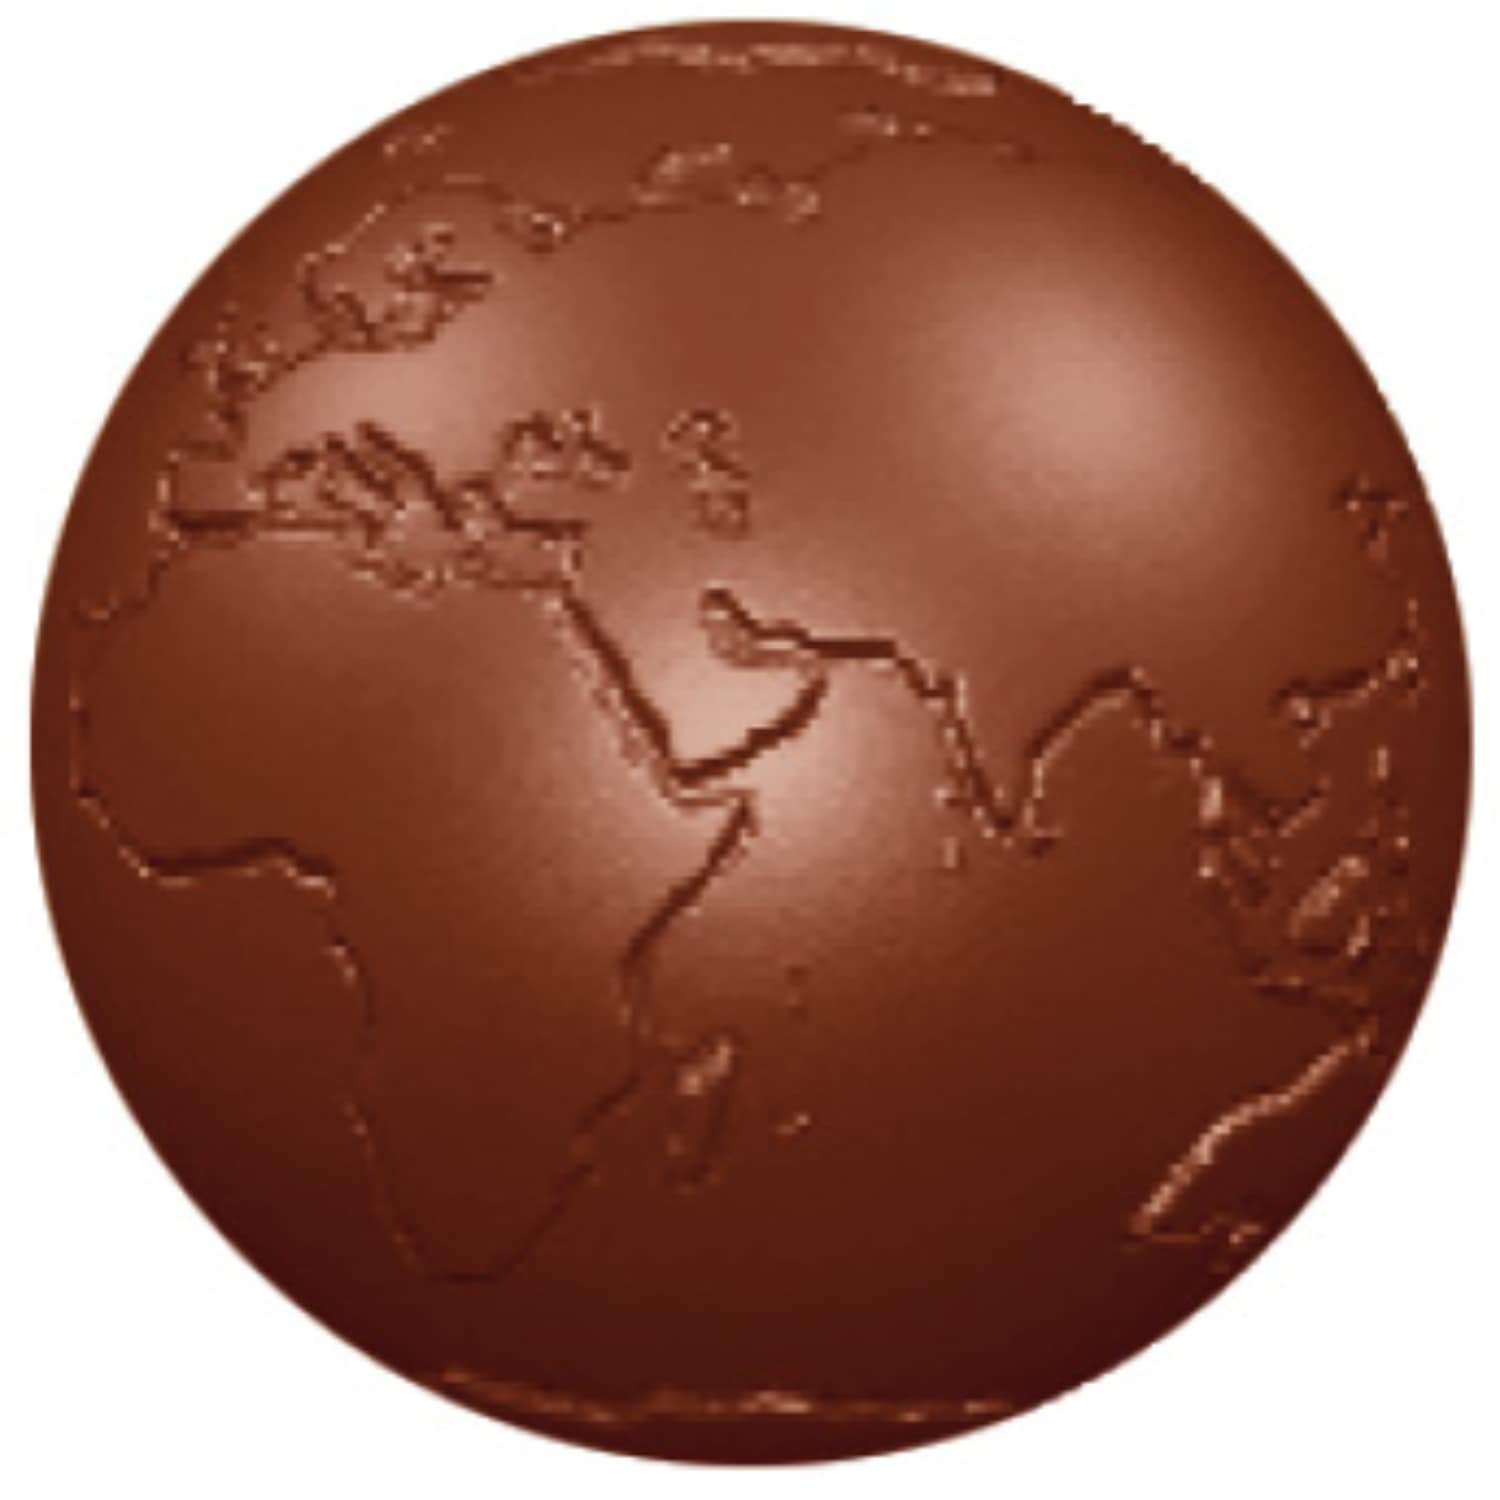 Chocolate mould "Sphere" 421648